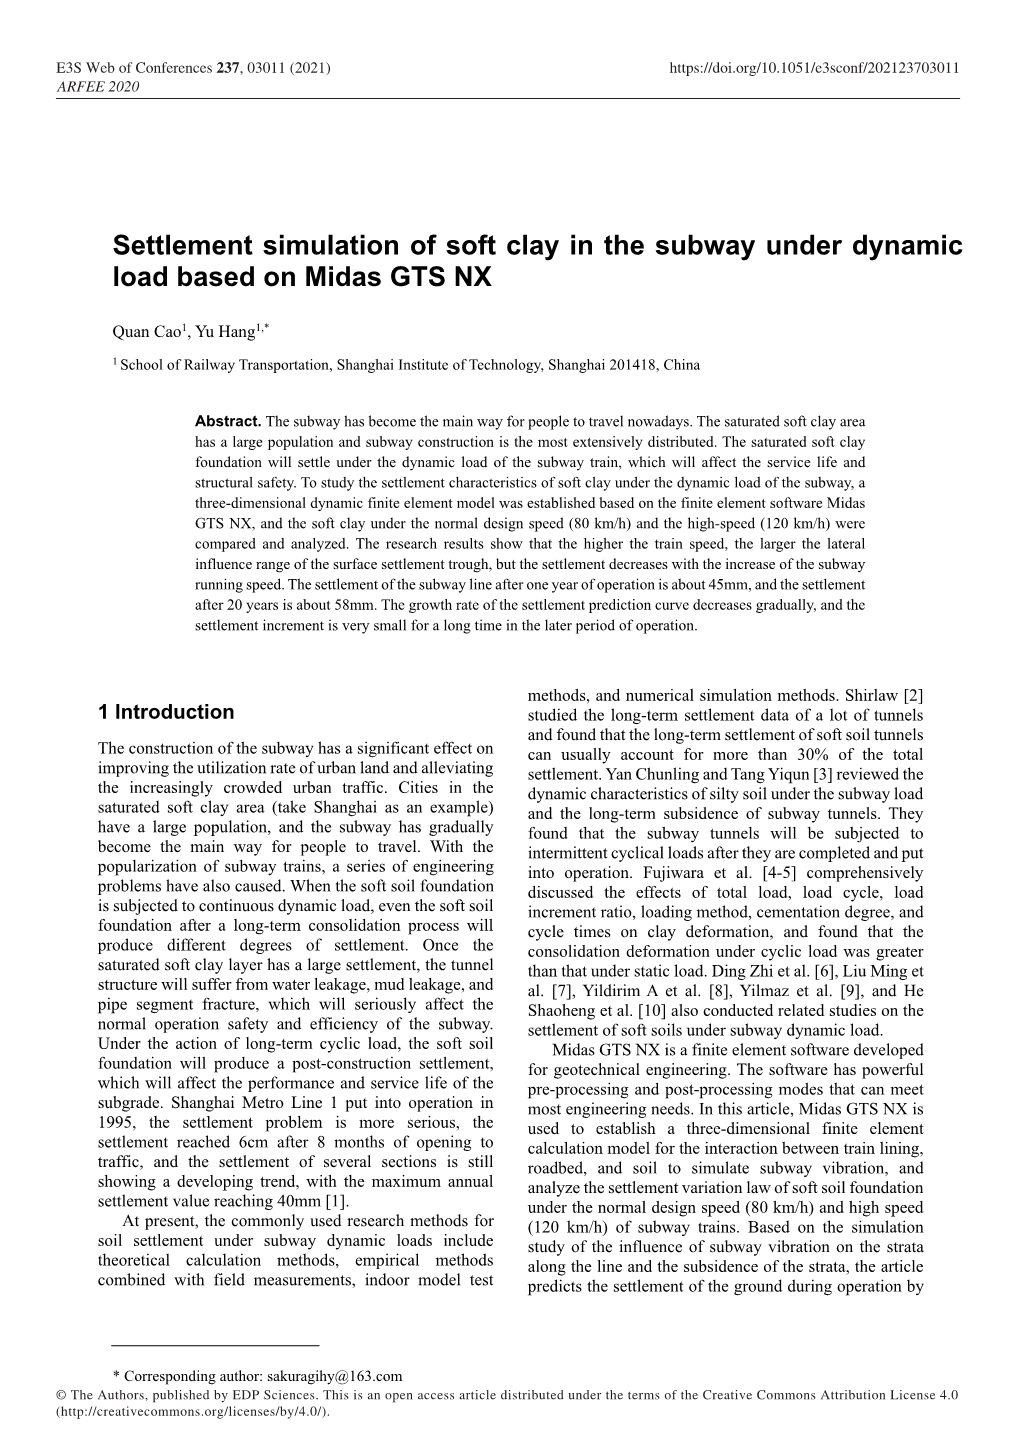 Settlement Simulation of Soft Clay in the Subway Under Dynamic Load Based on Midas GTS NX